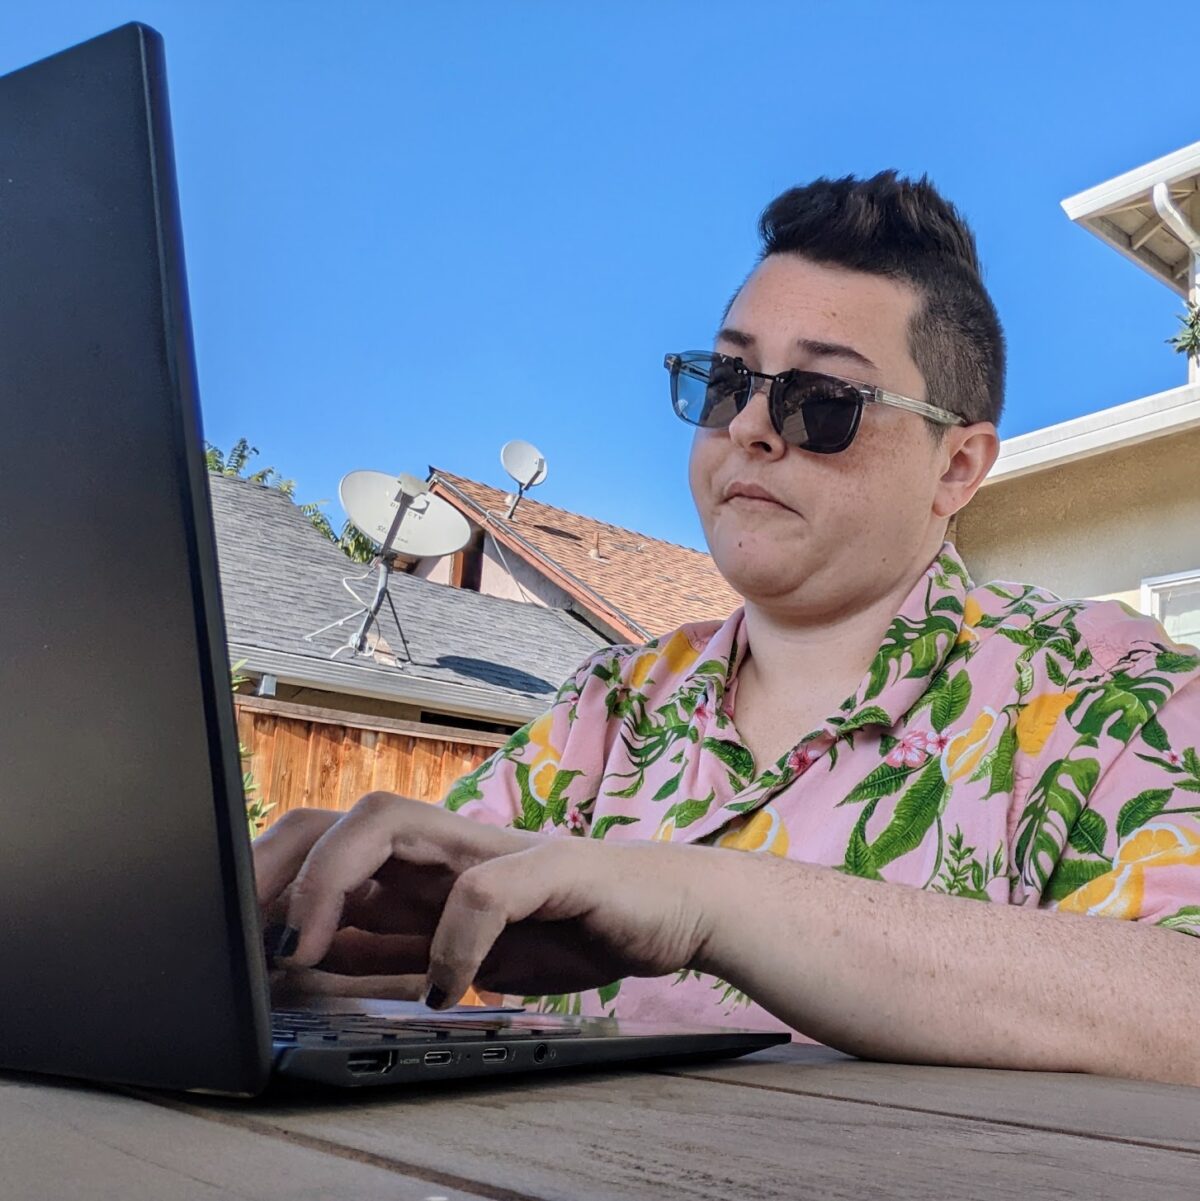 Selfie of a person typing on a laptop sitting outside